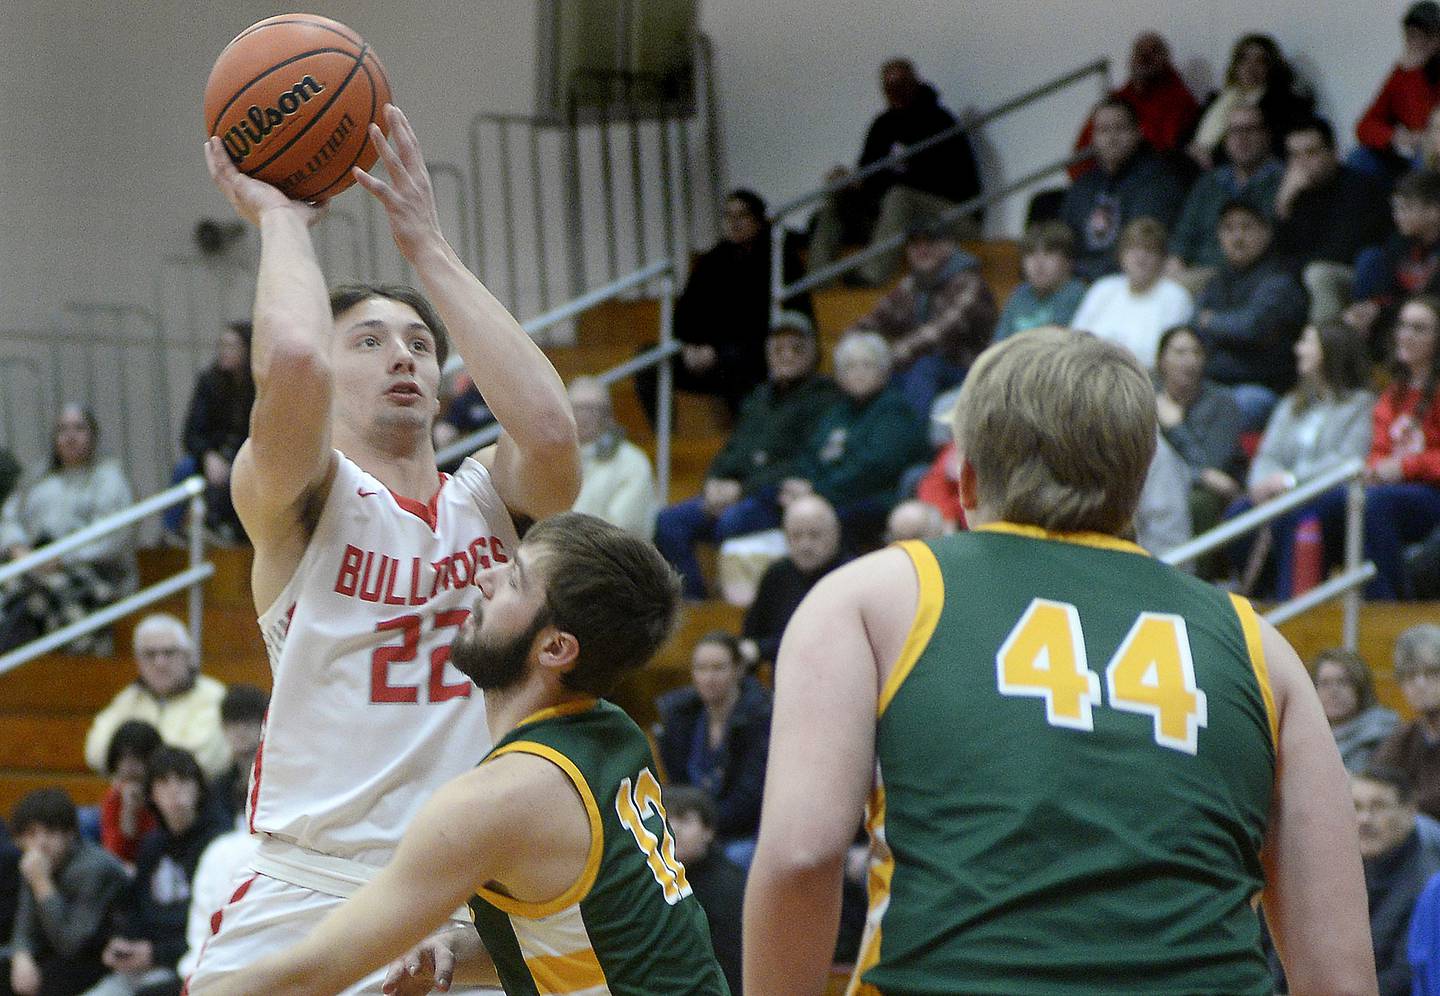 Streator’s Christian Benning shoots over Coal City’s Carson Shepard in the 1st period on Tuesday, Jan. 31, 2023 at Streator High School.